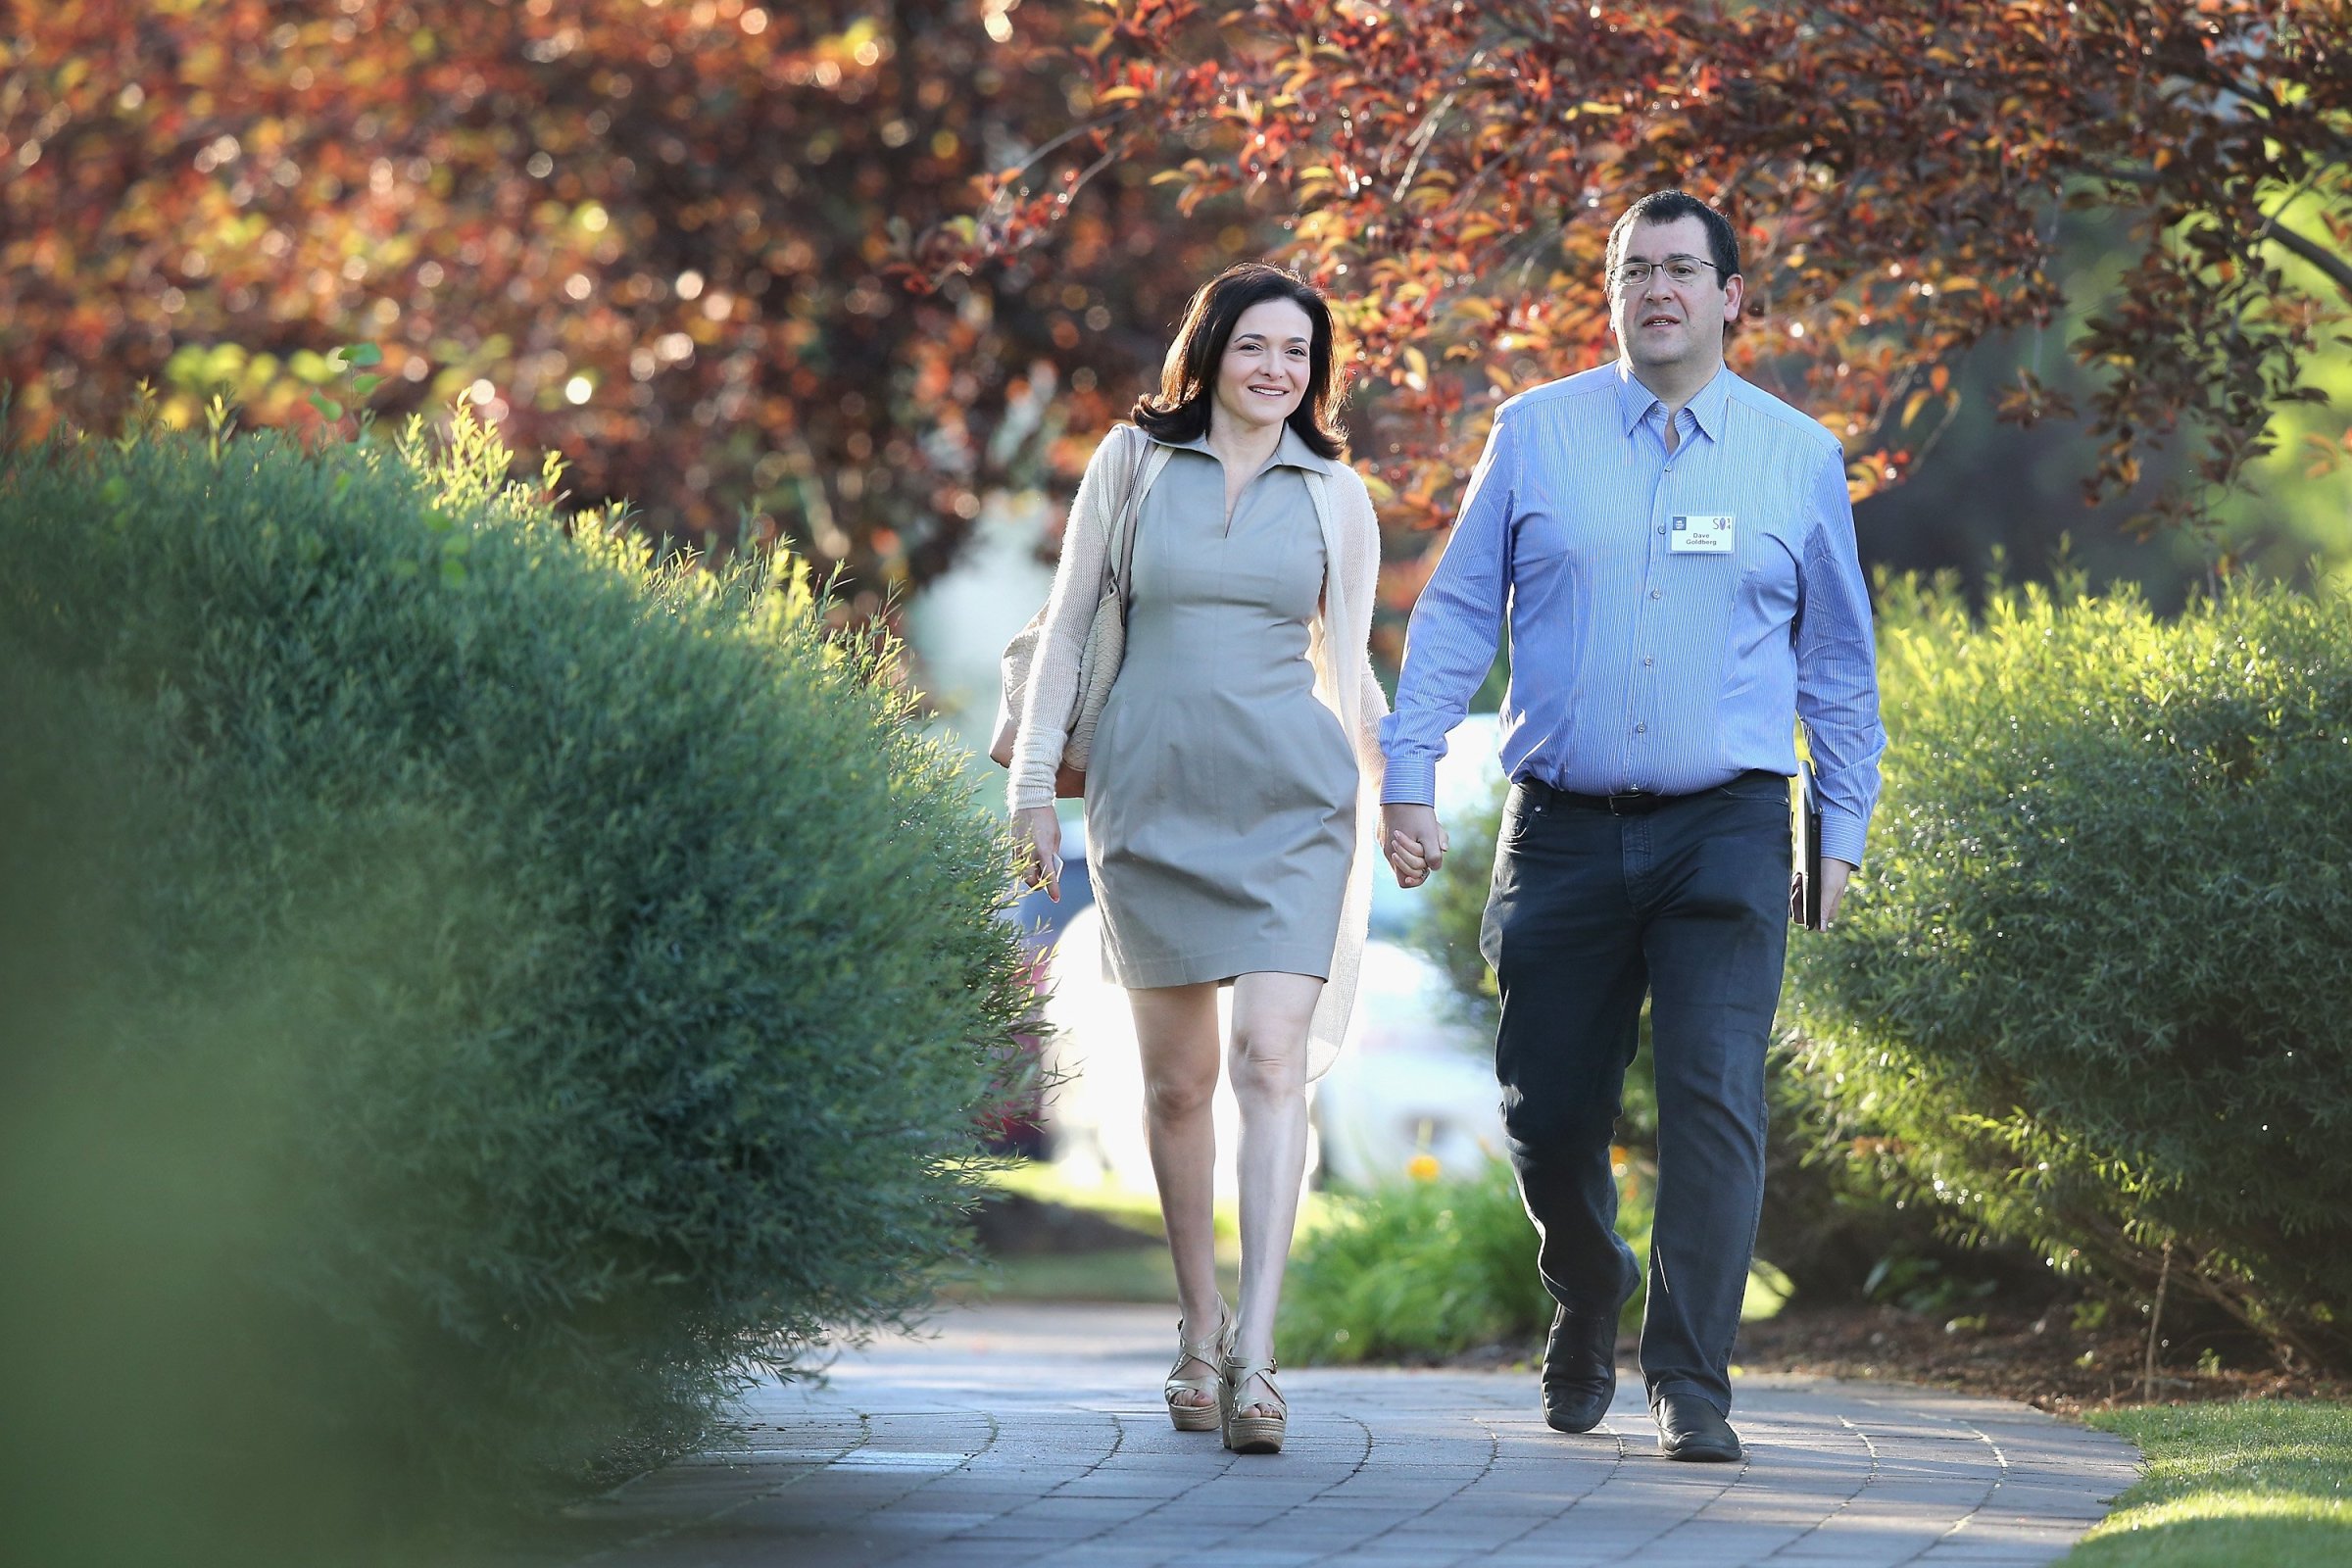 Facebook COO Sheryl Sandberg and husband Dave Goldberg attending the Allen & Company Sun Valley Conference on July 9, 2014 in Sun Valley, Idaho.